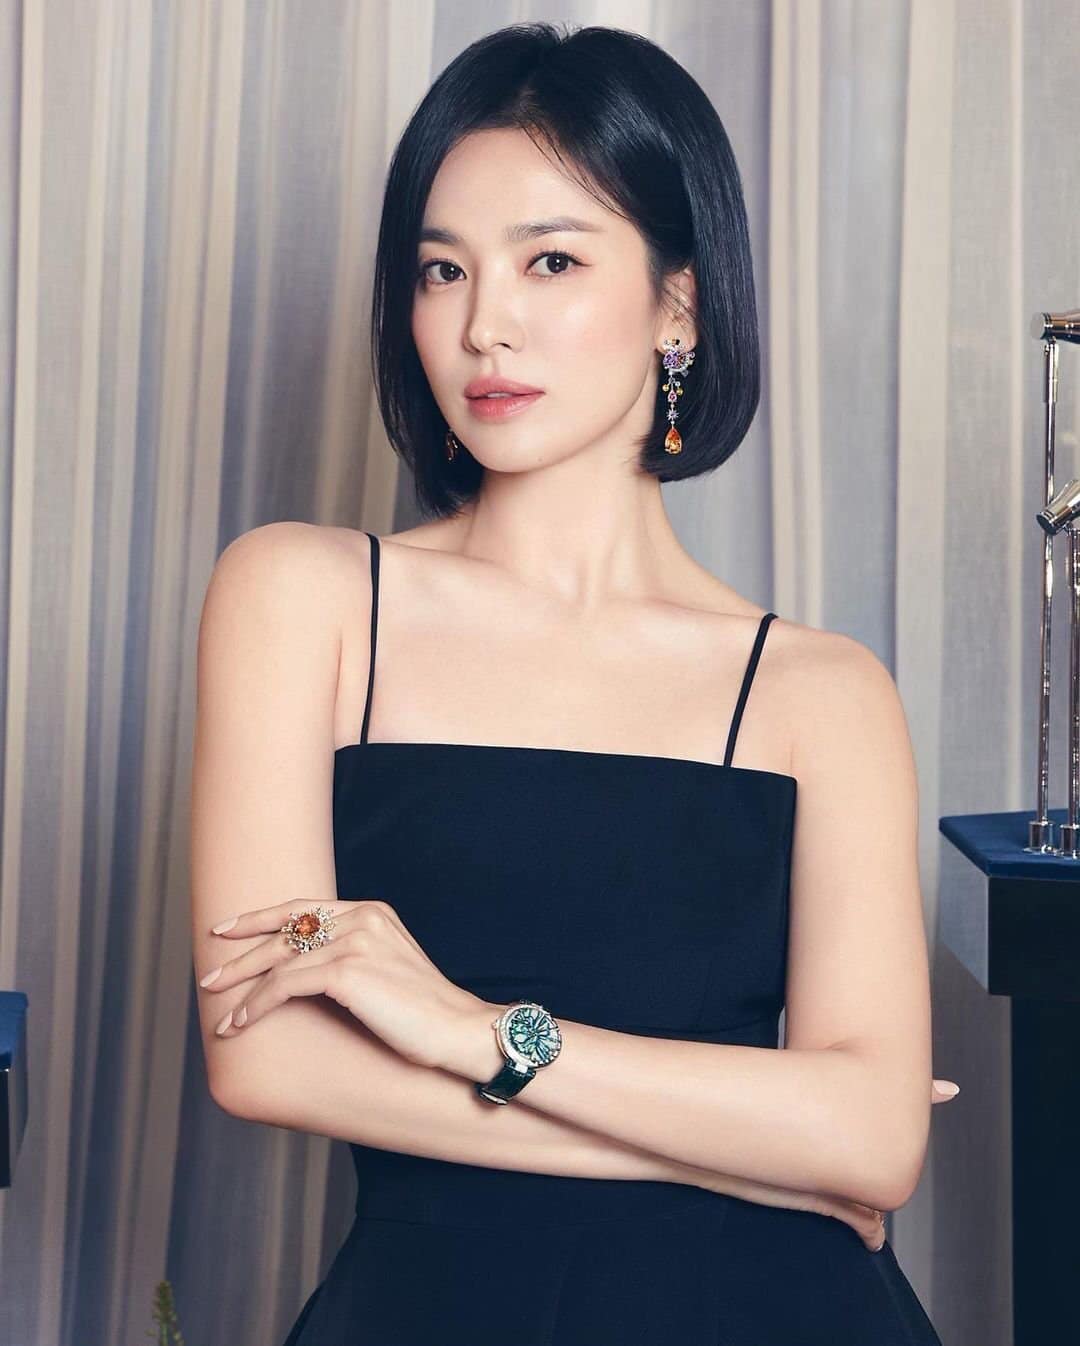 Song Hye Kyo rarely wears open clothes, but everyone is surprised with this masterpiece - Photo 2.